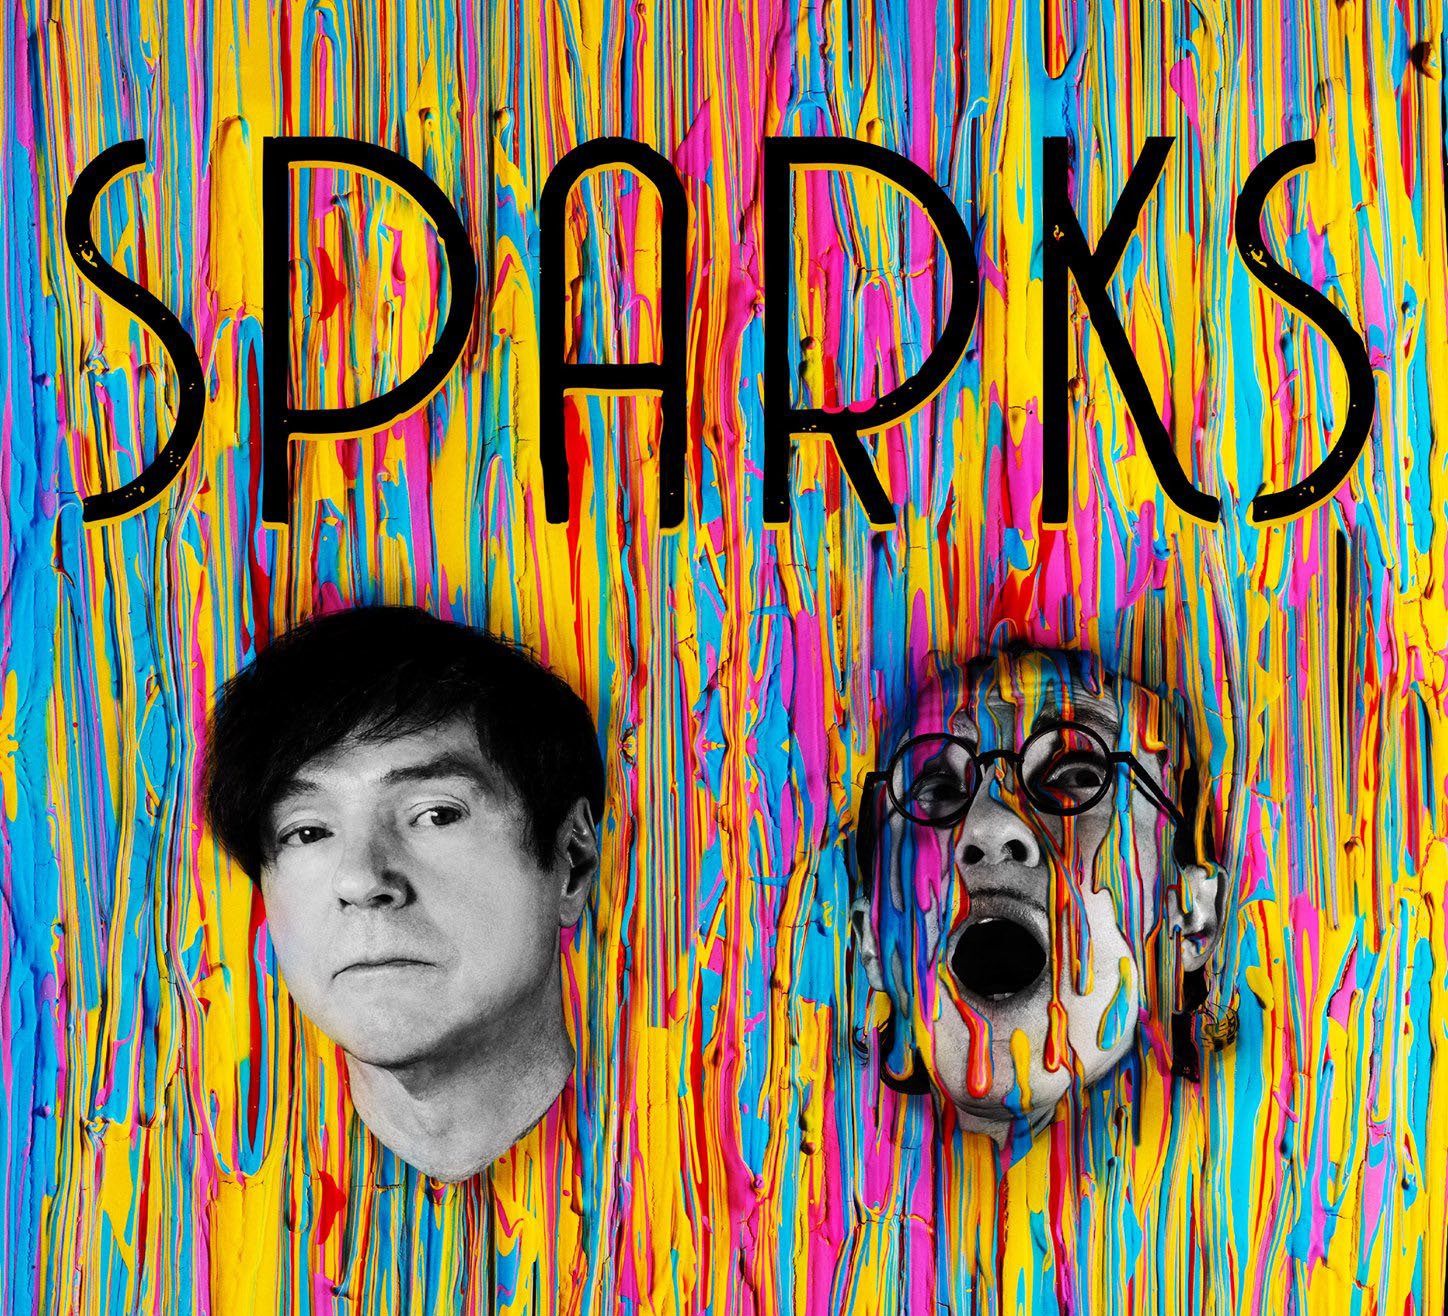 US pop-rock band SPARKS announce a headline Belfast show at The Limelight 1 on 26th October 2020 